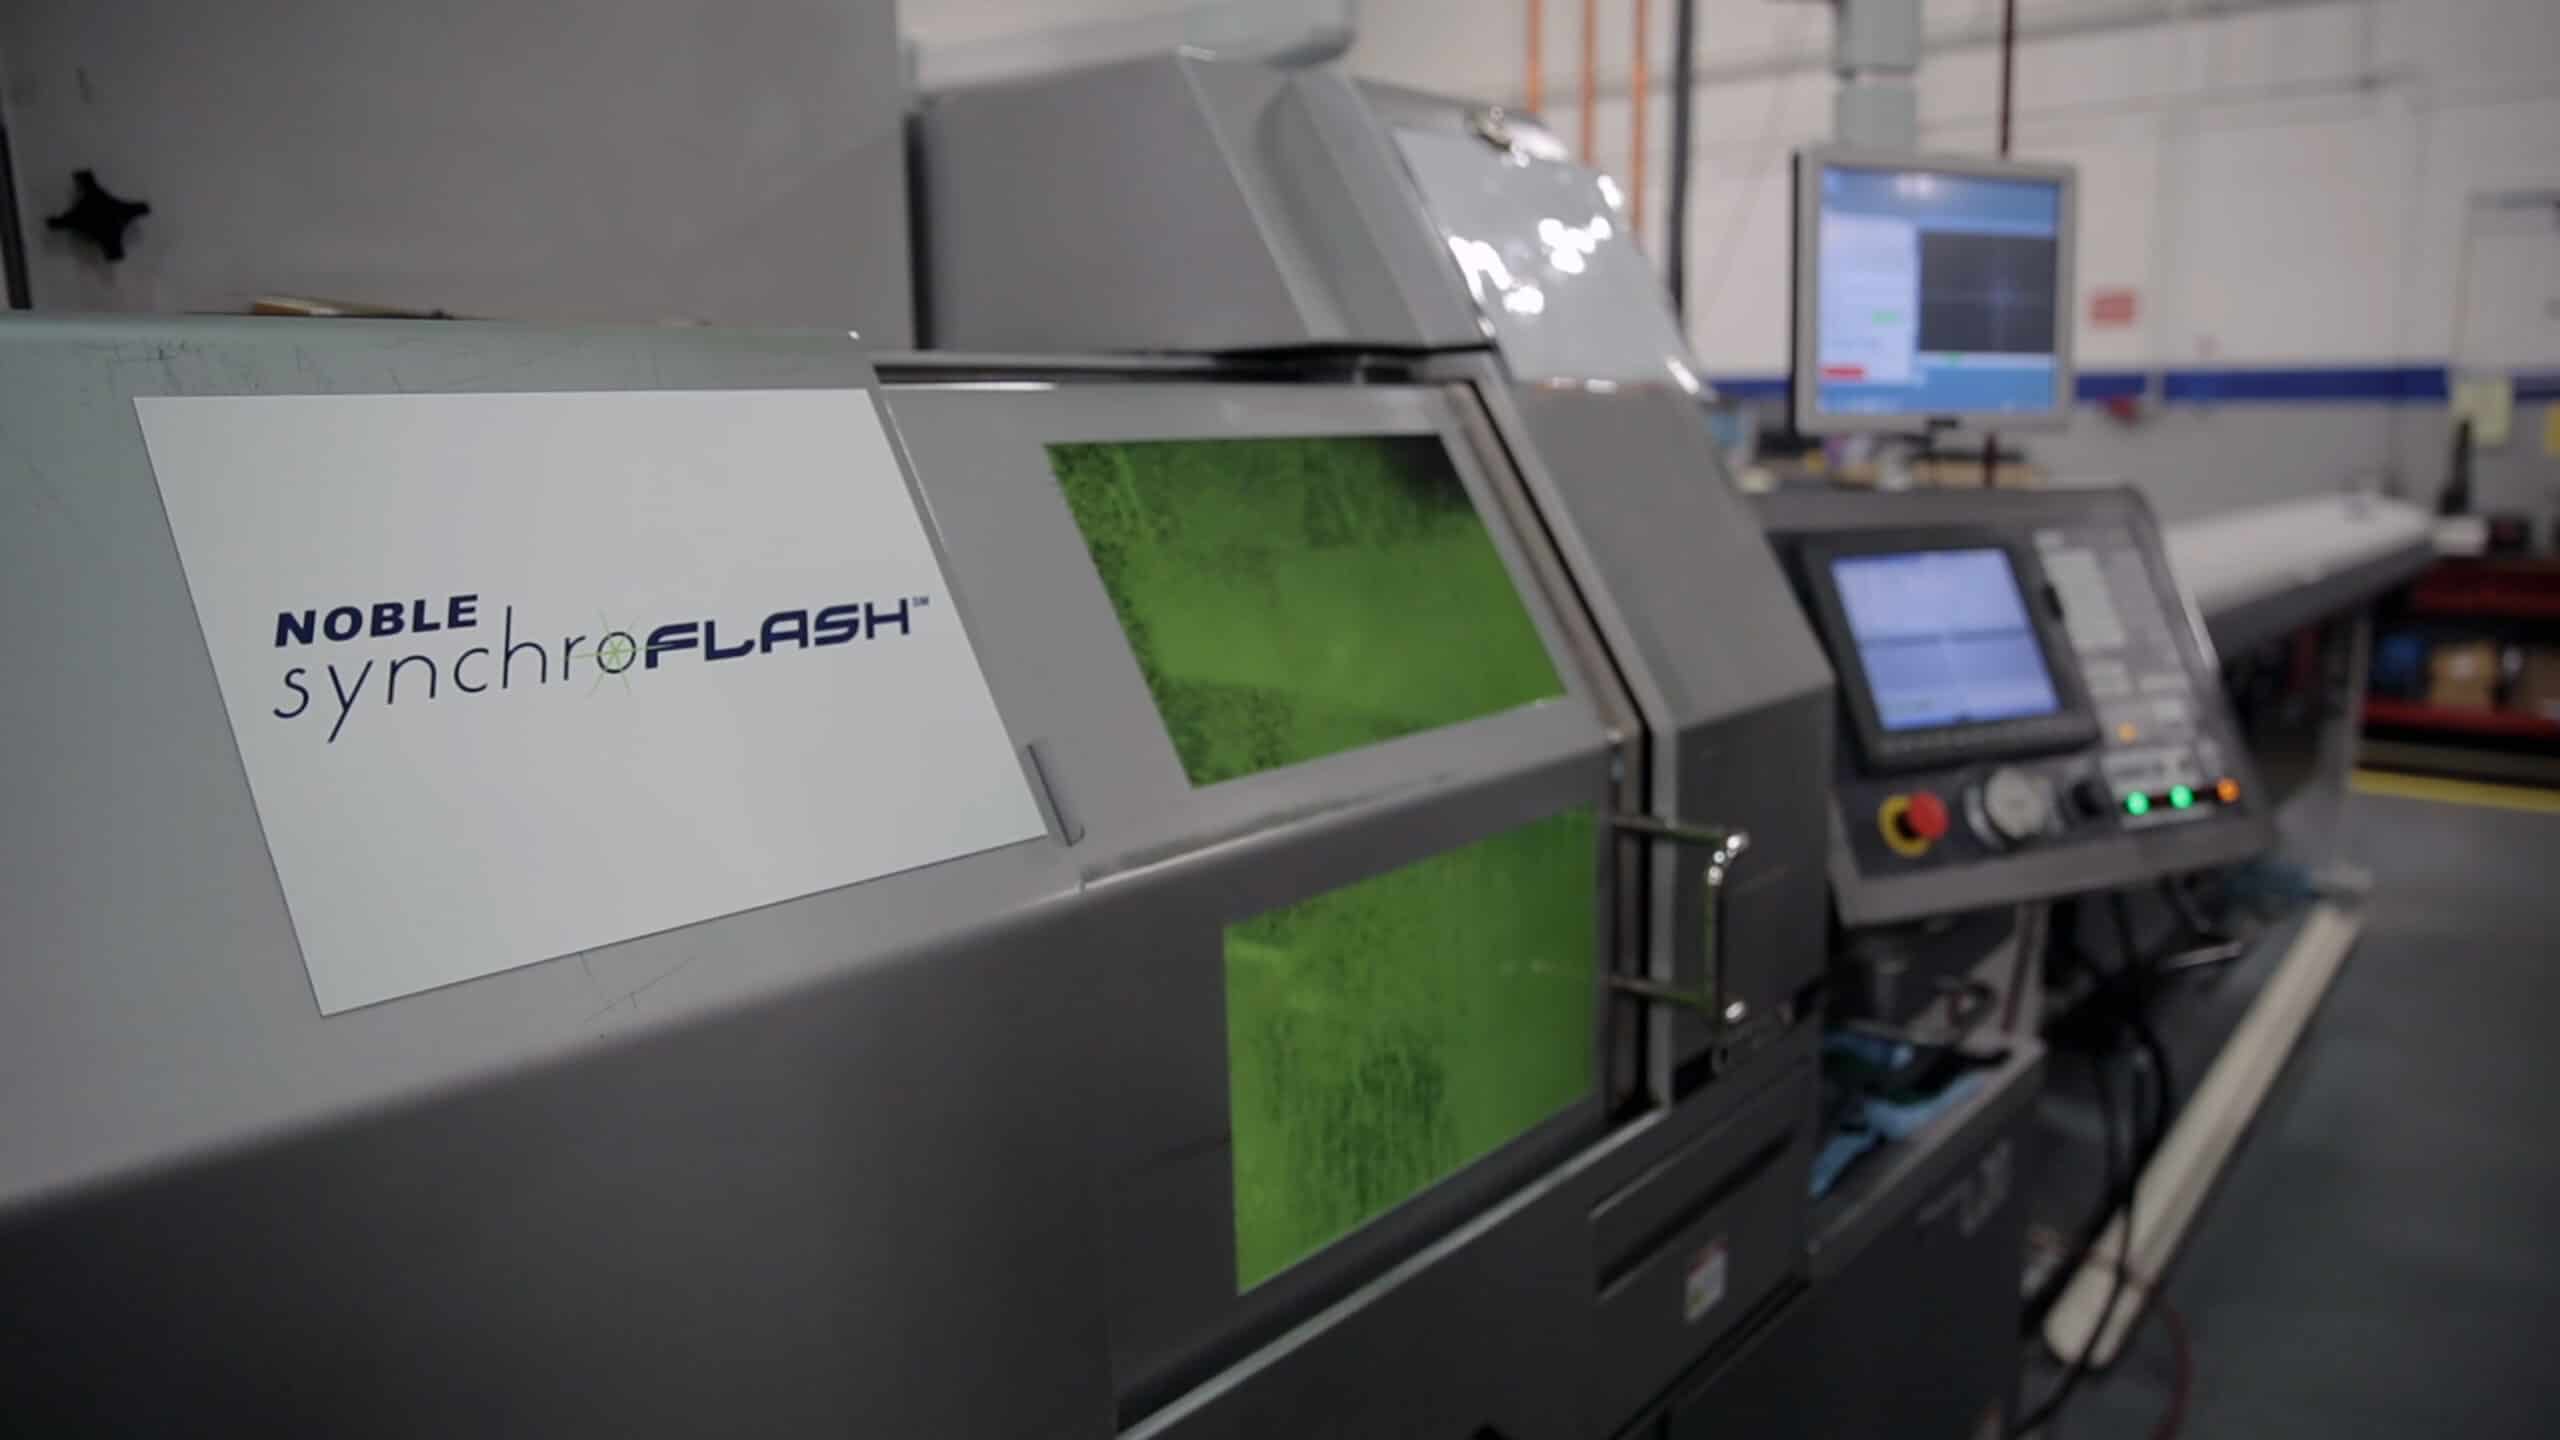 Introduced SynchroFlash machining capability for single operation laser and Swiss machining.